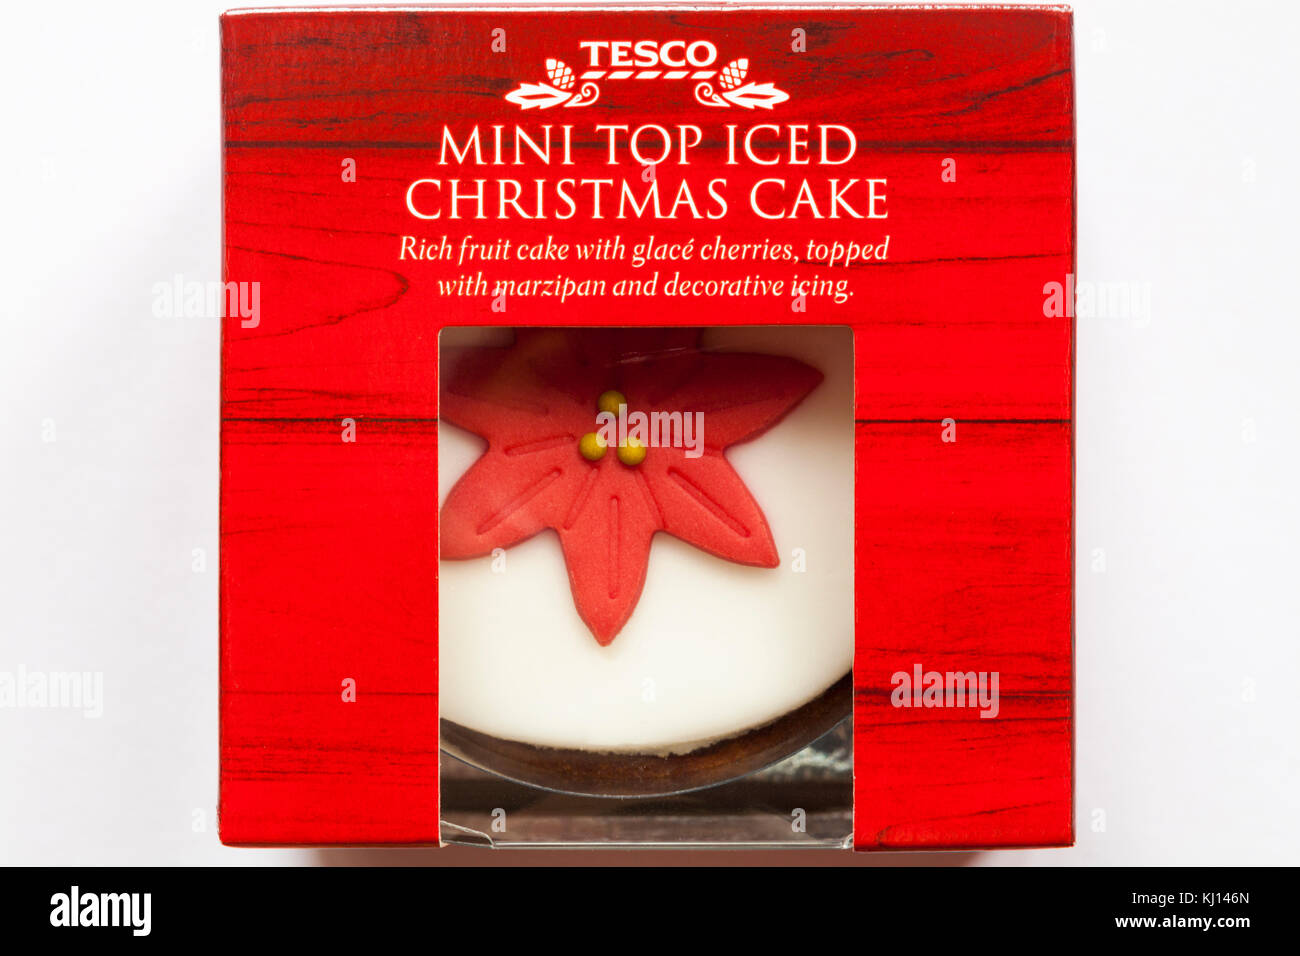 Tesco mini top iced Christmas cake - rich fruit cake with glace cherries, topped with marzipan and decorative icing set on white background Stock Photo